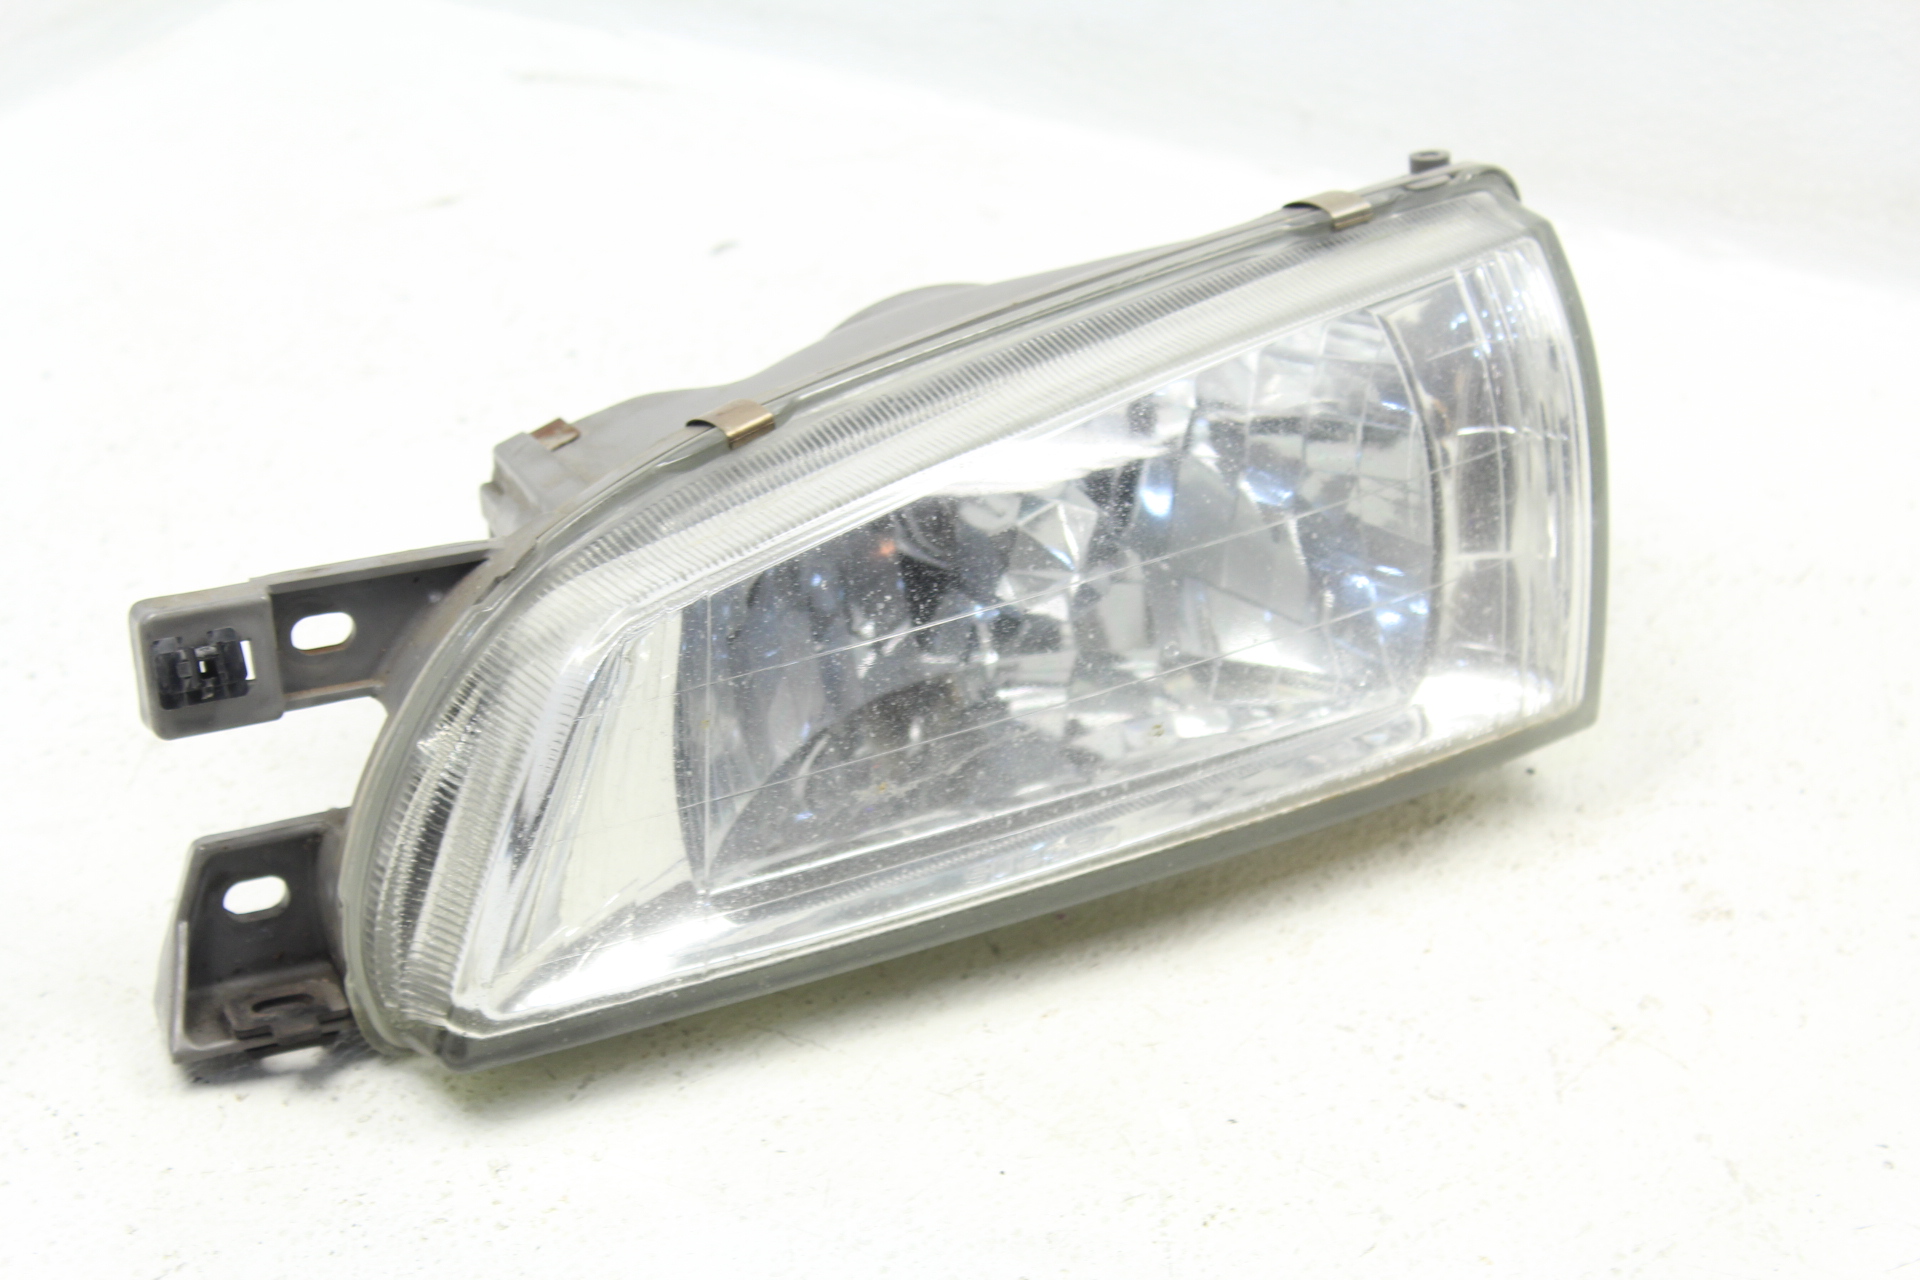 gc8 sequential headlights